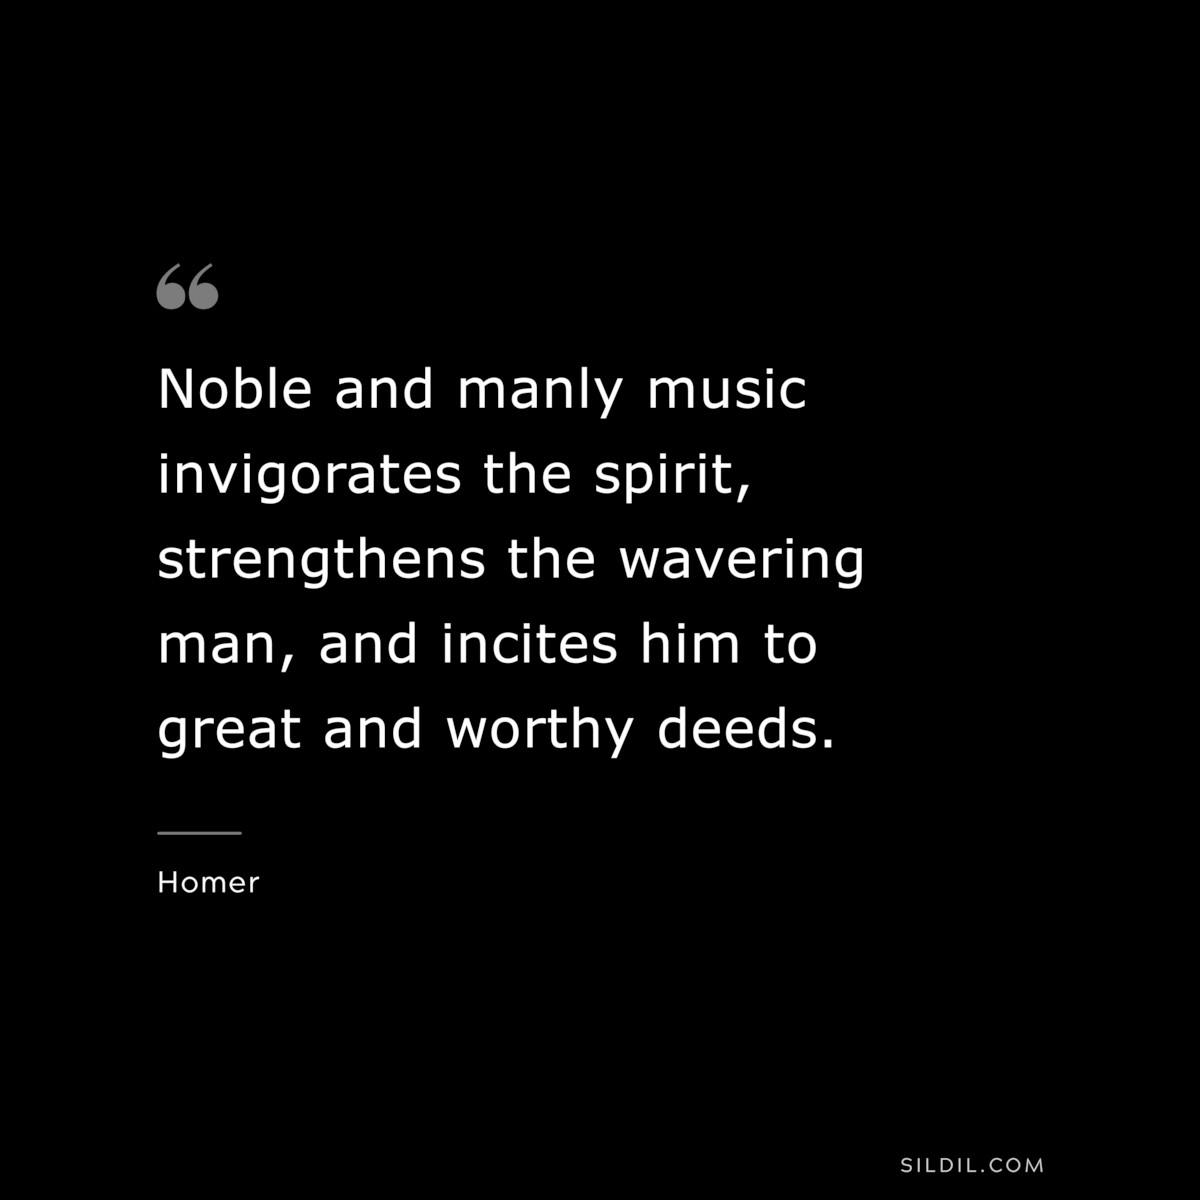 Noble and manly music invigorates the spirit, strengthens the wavering man, and incites him to great and worthy deeds. ― Homer